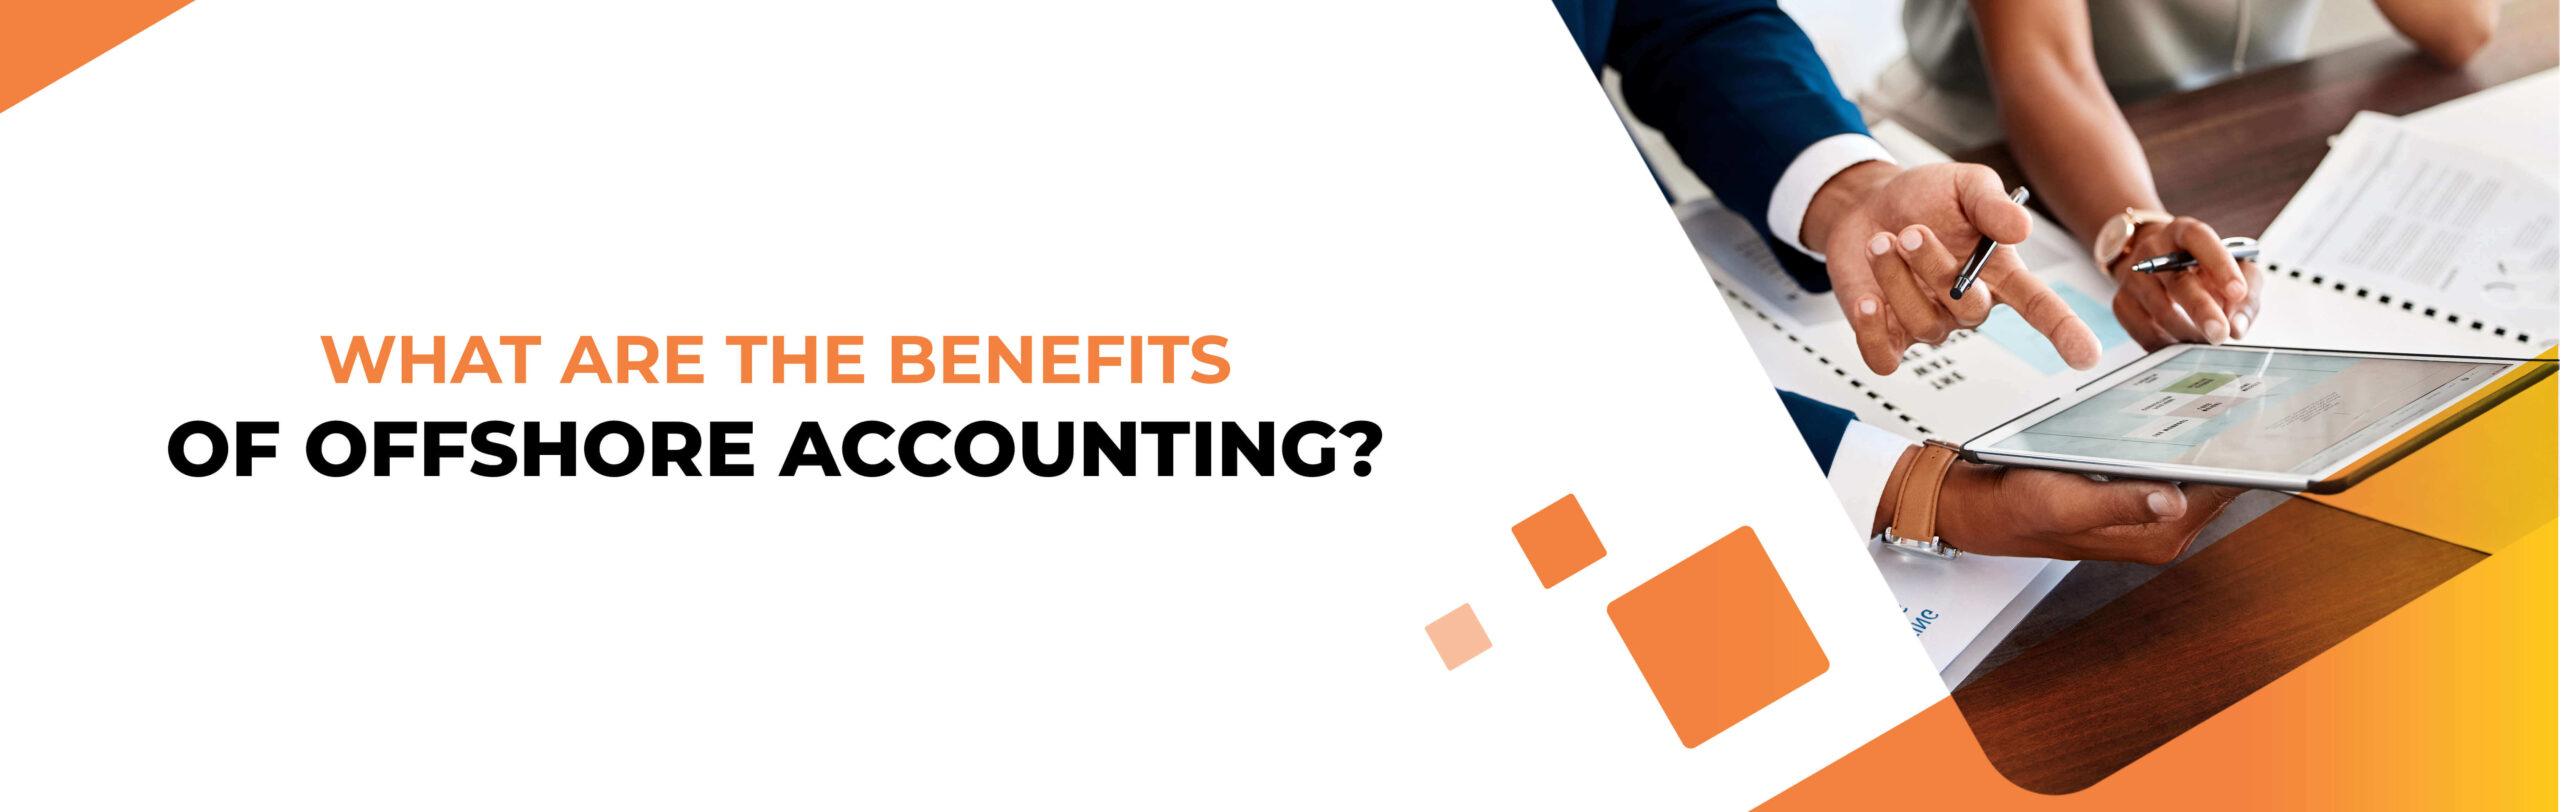 What are the benefits of offshore accounting